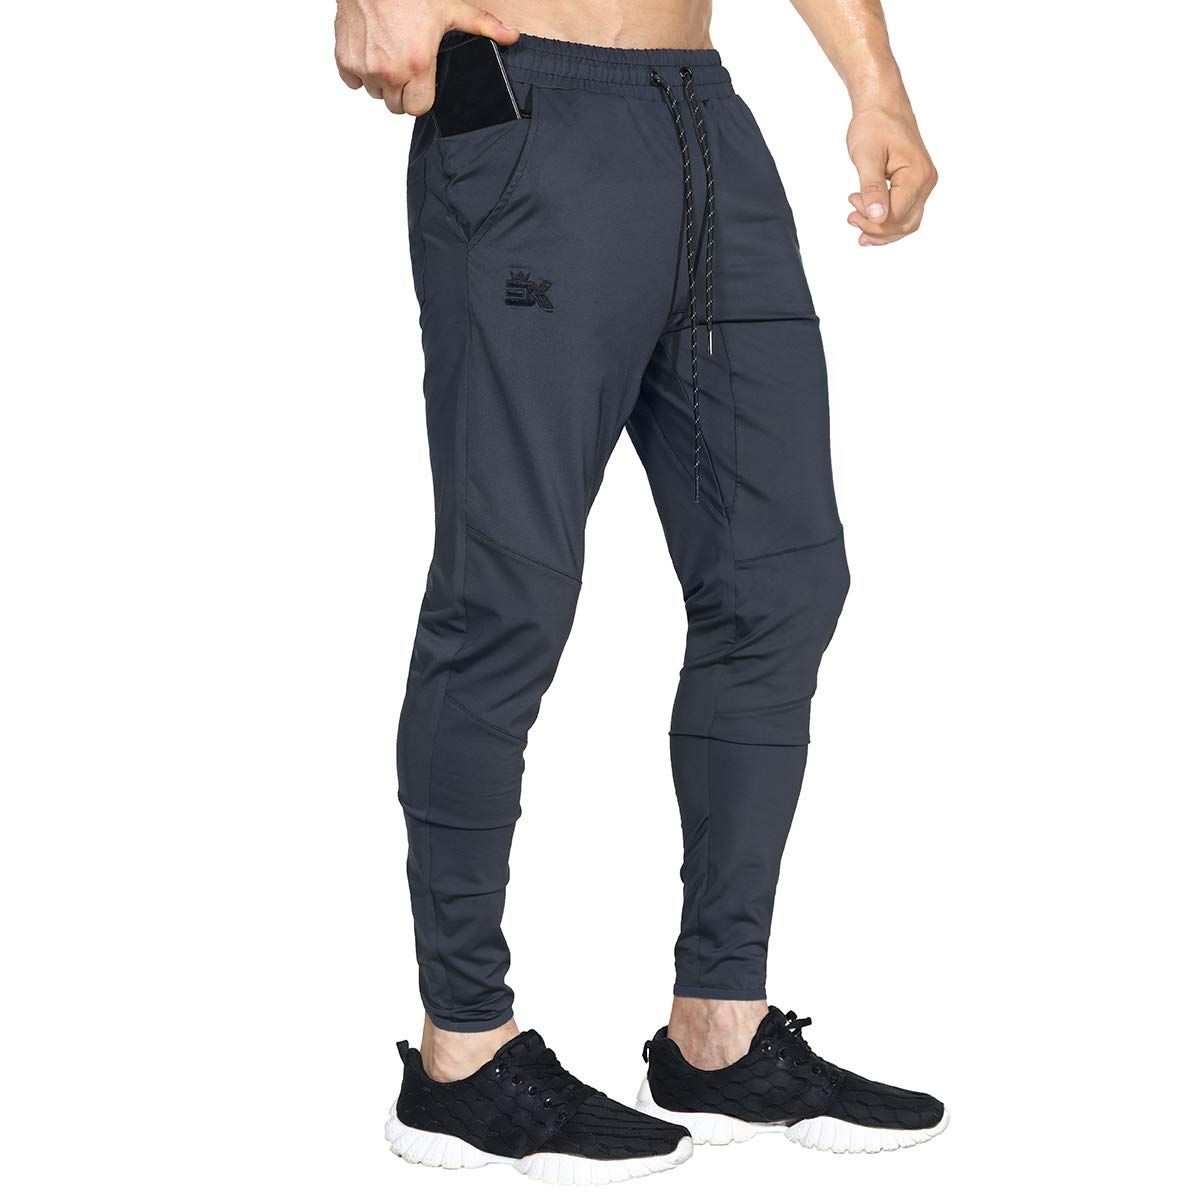 6 of the best travel pants for men | The Coolector